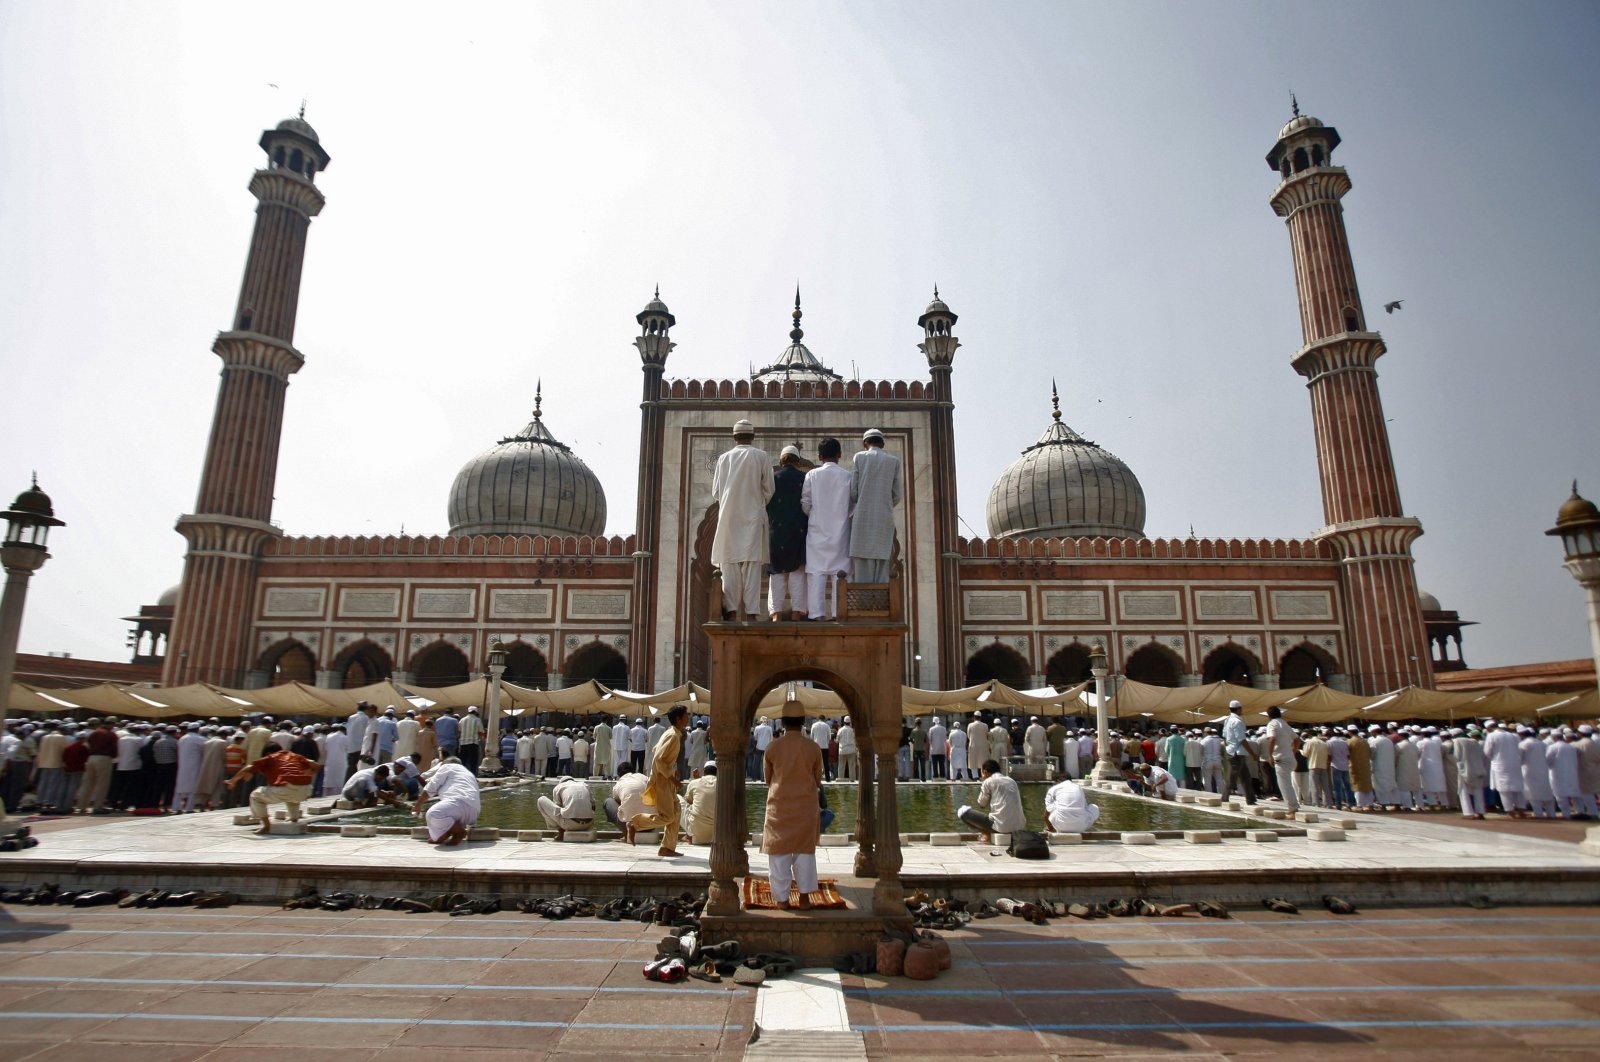 Muslims attend Friday prayers at the Jama Masjid in the old quarter of Delhi, India, Oct. 1, 2010. (Reuters Photo)